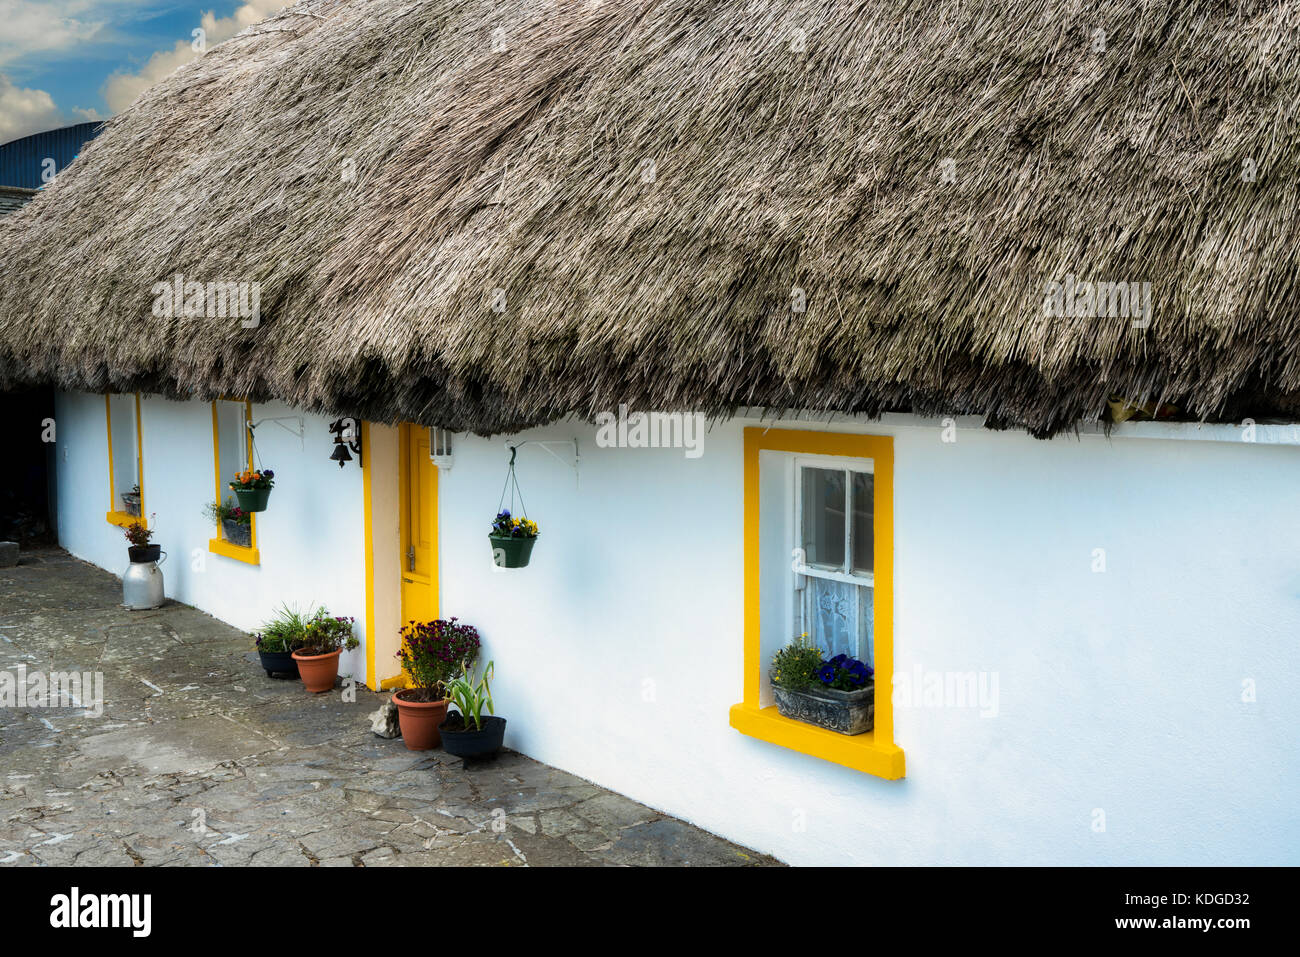 Thatached roof and house front, County Clare, Ireland Stock Photo